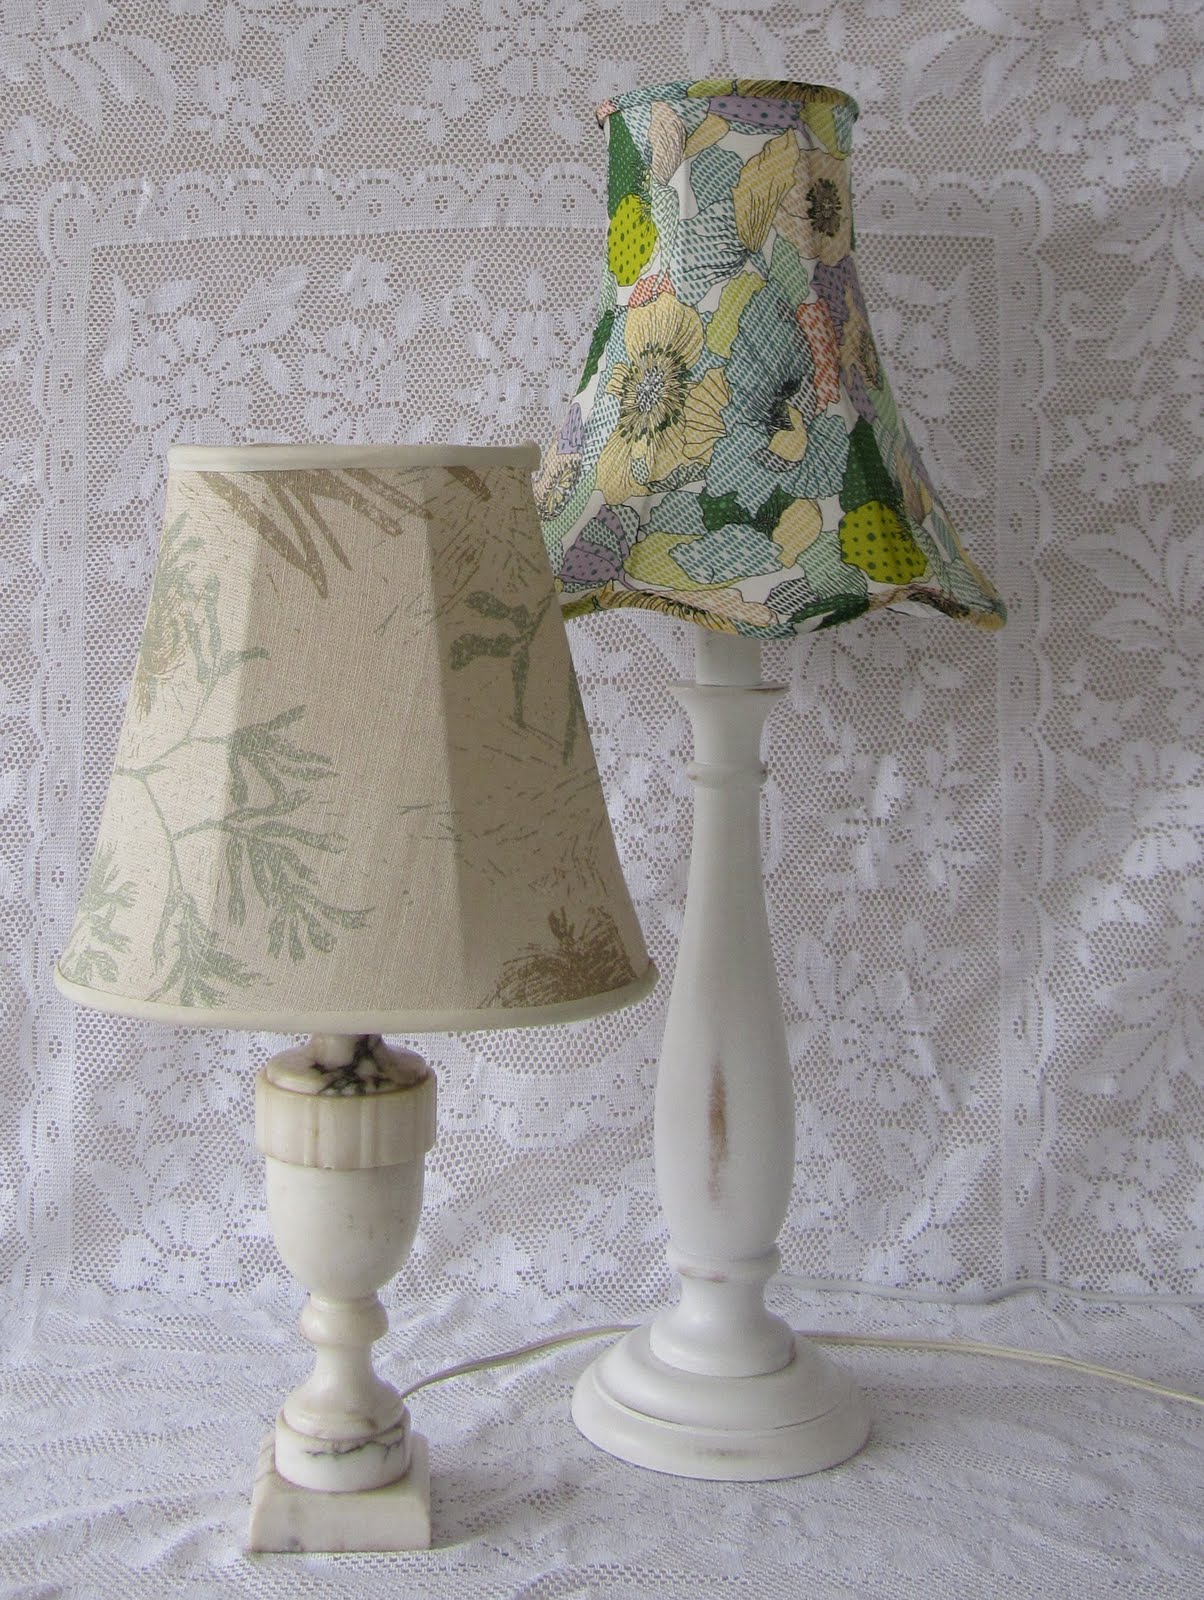 Recover A Lampshade Tutorial, How To Cover A Lampshade Frame With Fabric